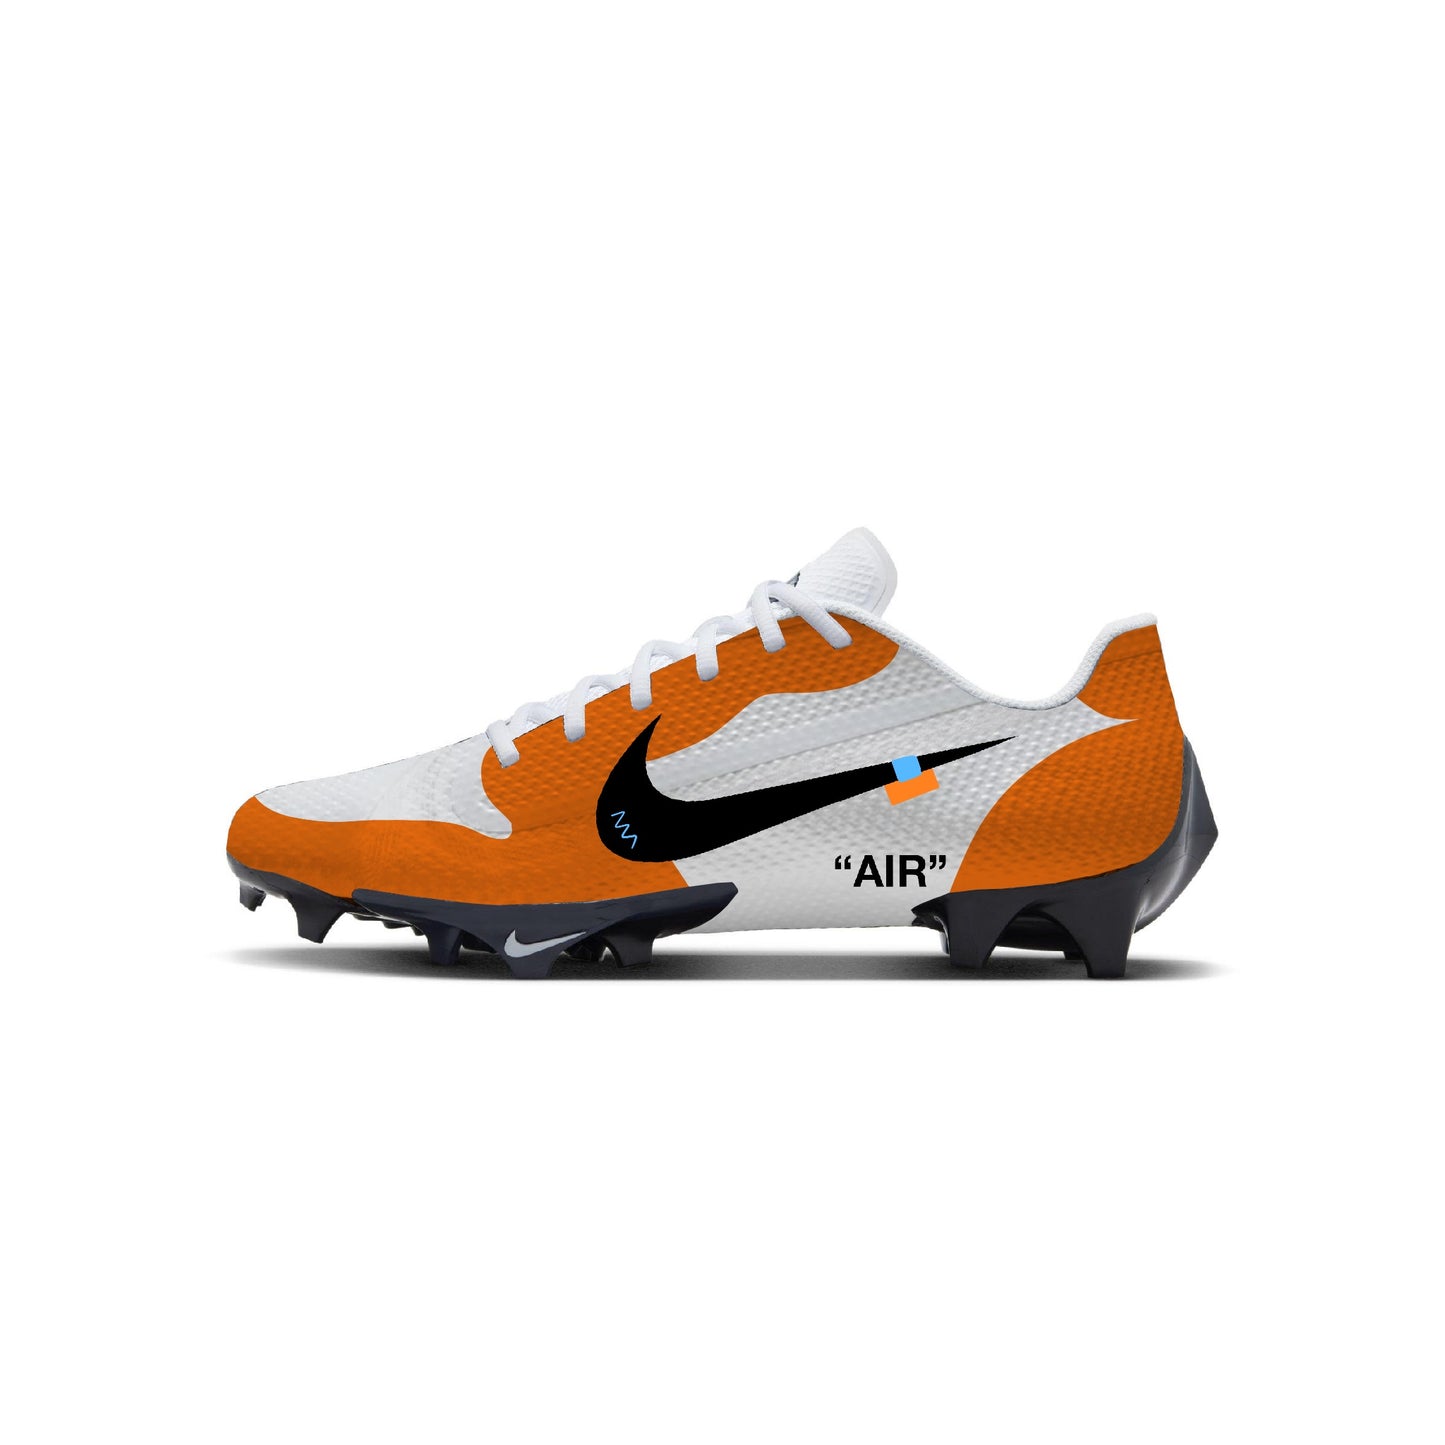 “OFF-WHITE” J1 Low Football Cleats